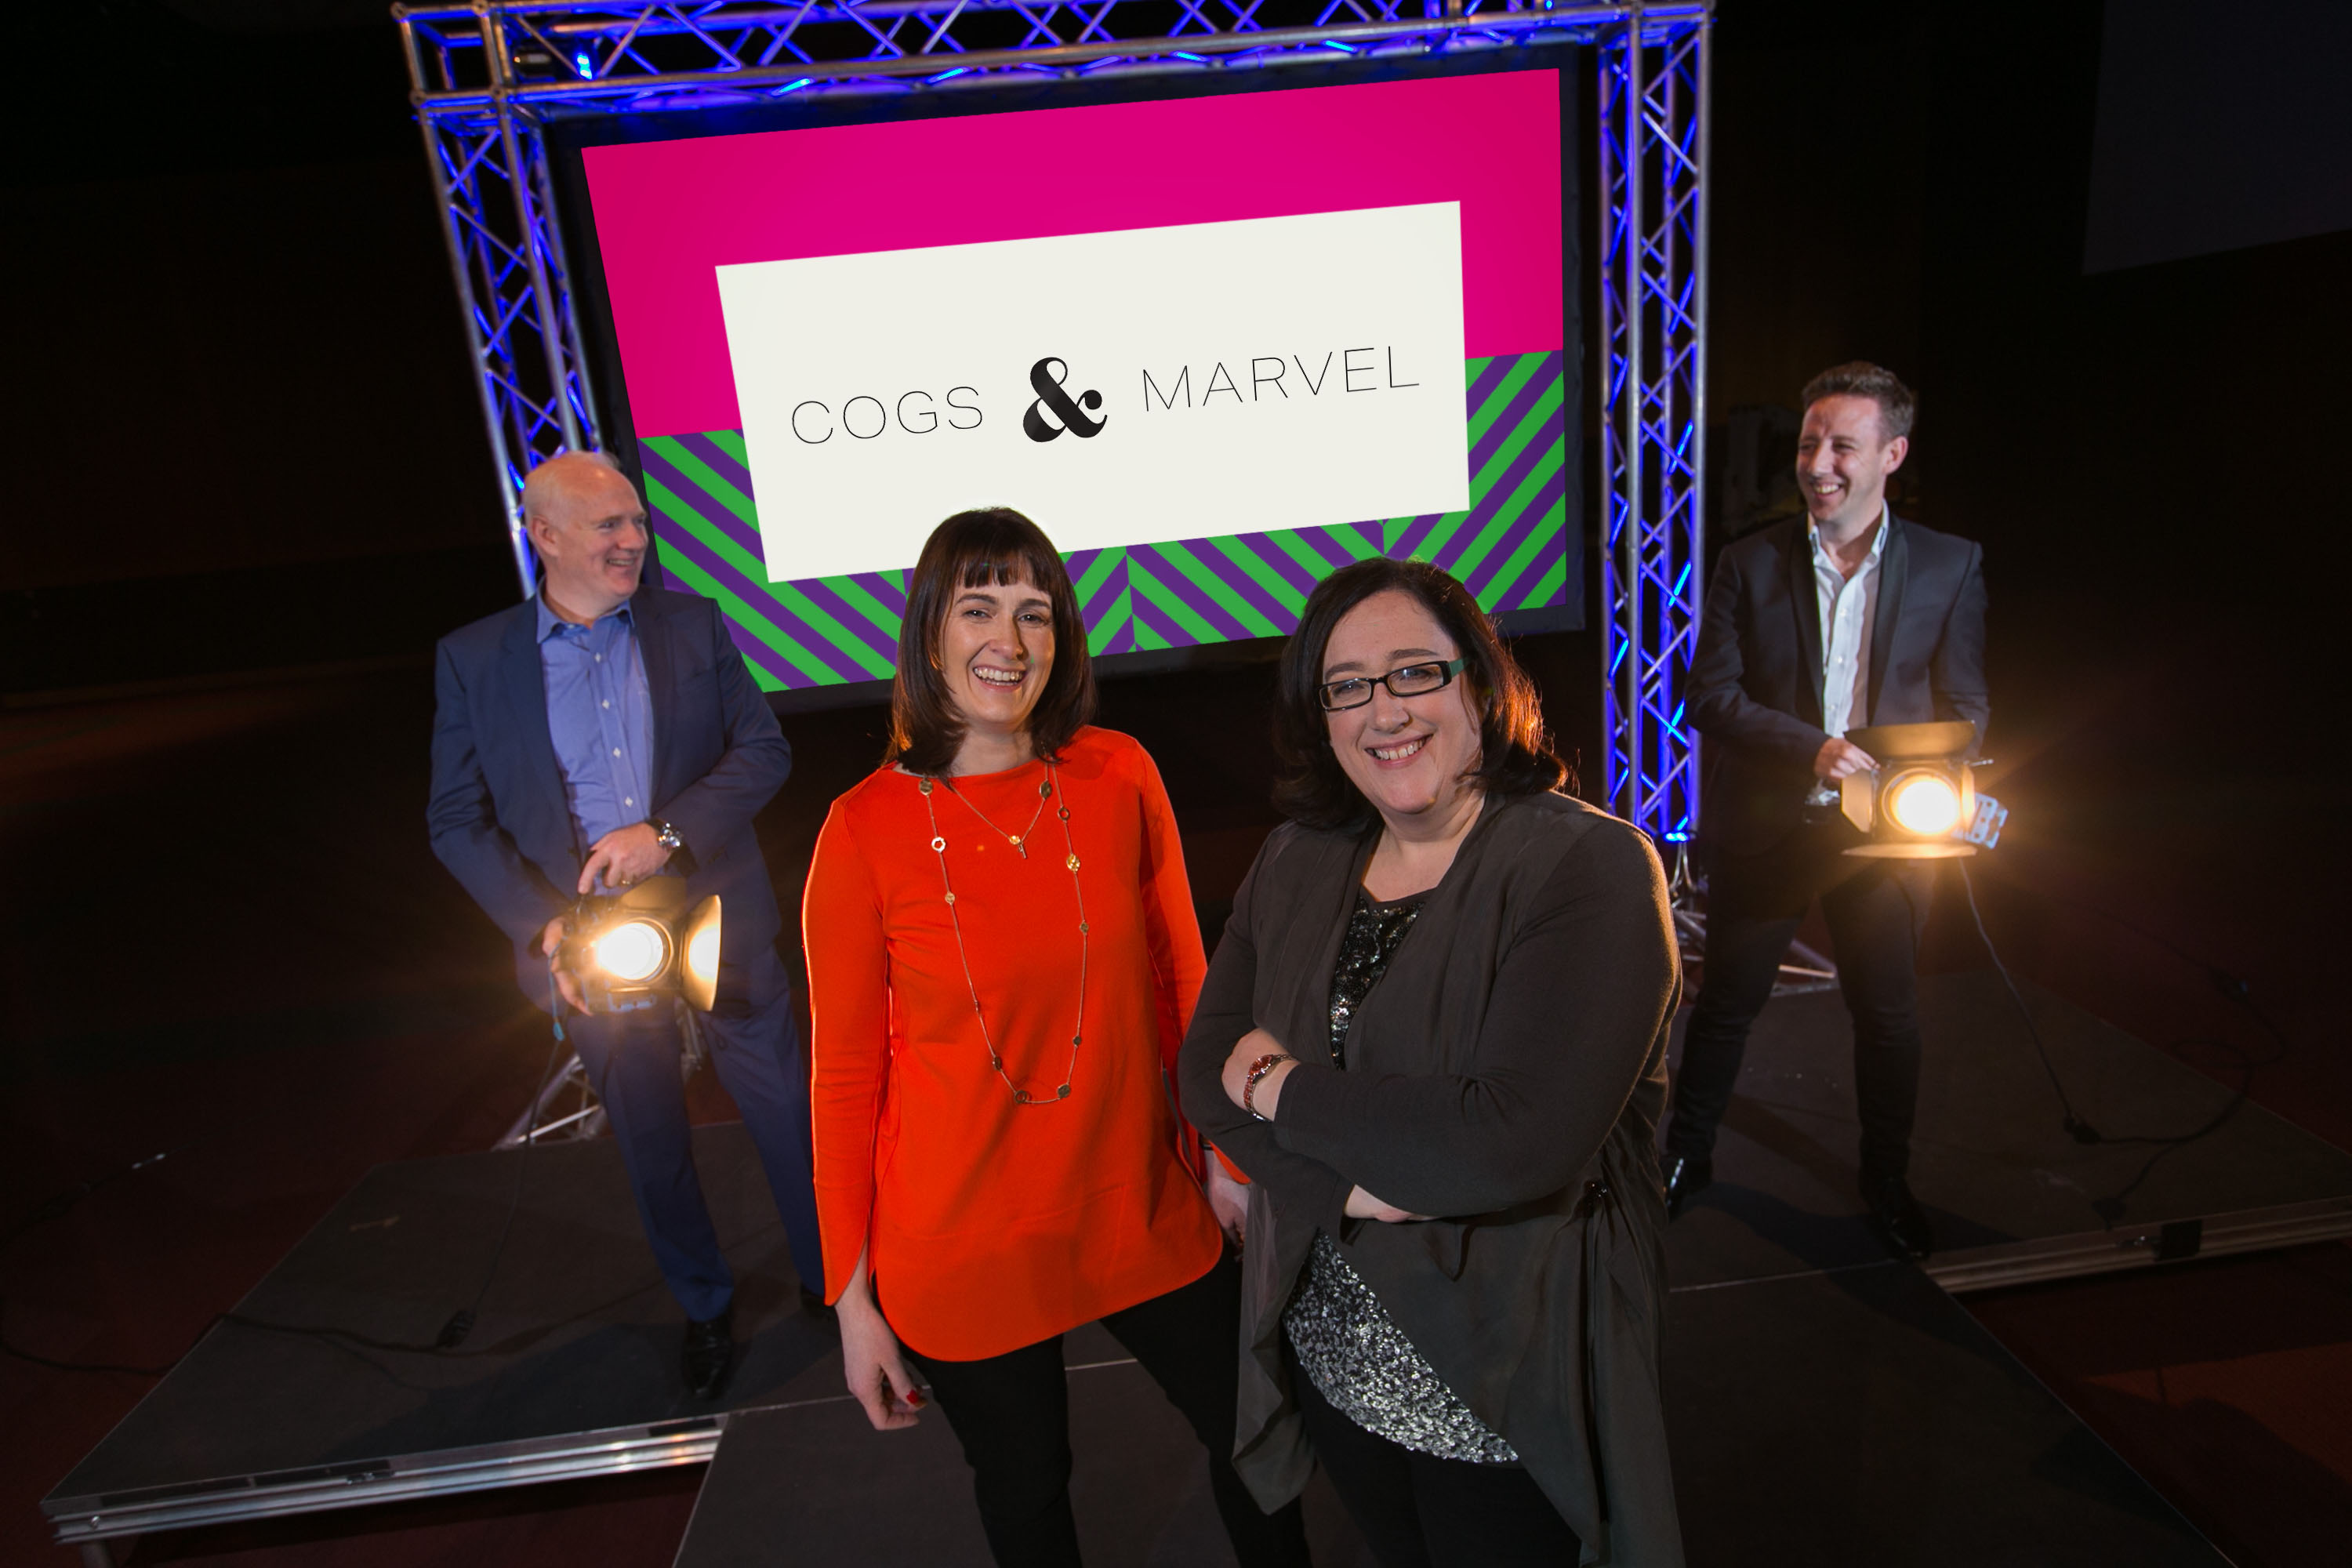 Photographed announcing its company's expansion plans and the rebrand of Irish event agency business 'Greenlight Events' to 'Cogs & Marvel' are co-founders from left to right: Róisín Callaghan and Jane Gallagher with Killian Whelan, non-executive chairman and Dave Smyth, CEO. Picture by Shane O'Neill Photography.